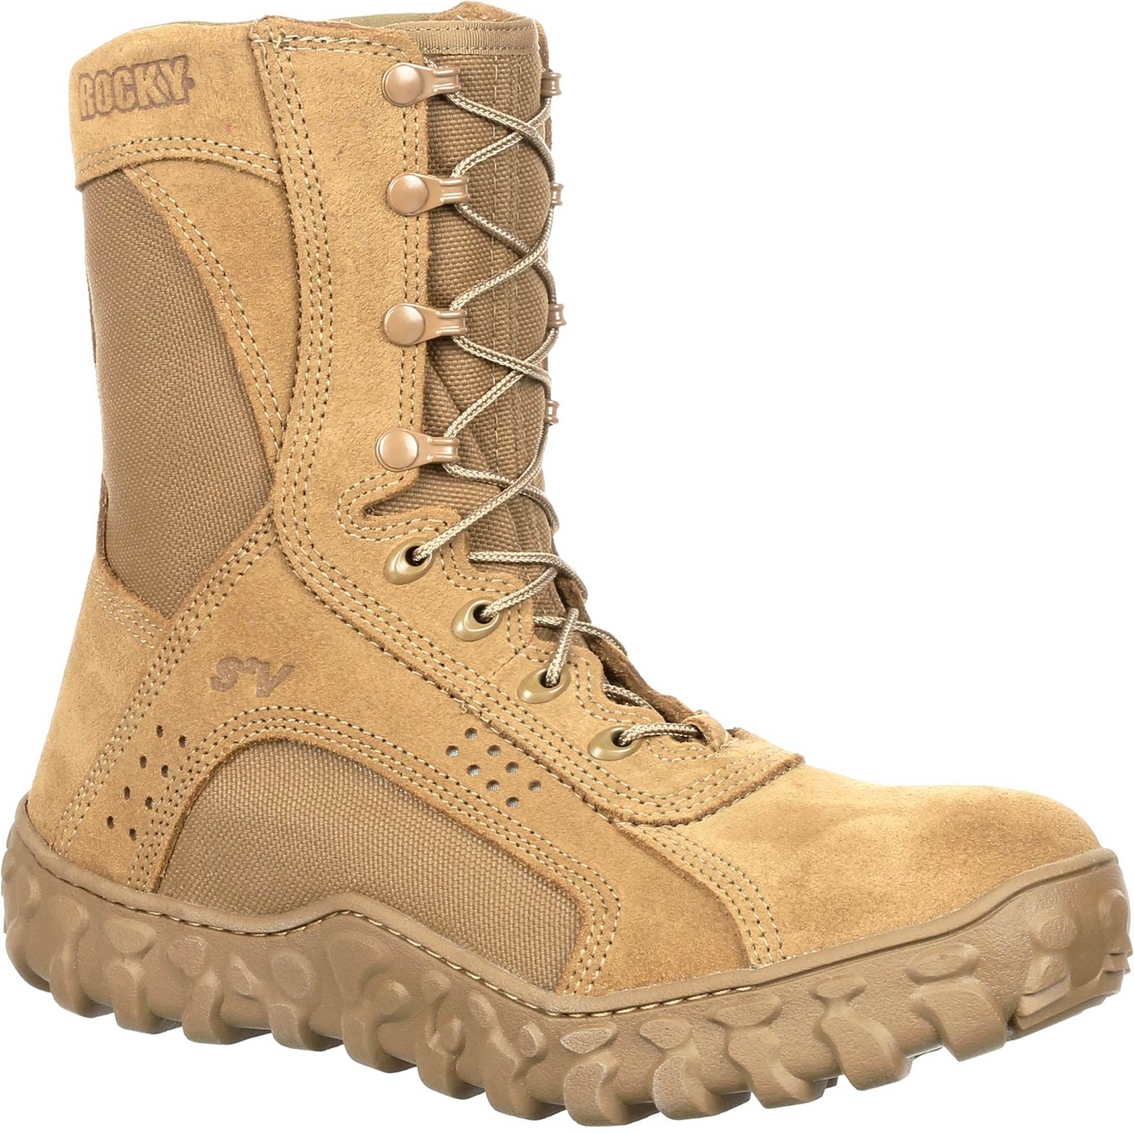 ALL SIZES NEW ROCKY S2V STEEL TOE MILITARY BOOTS COYOTE FQ0006104 